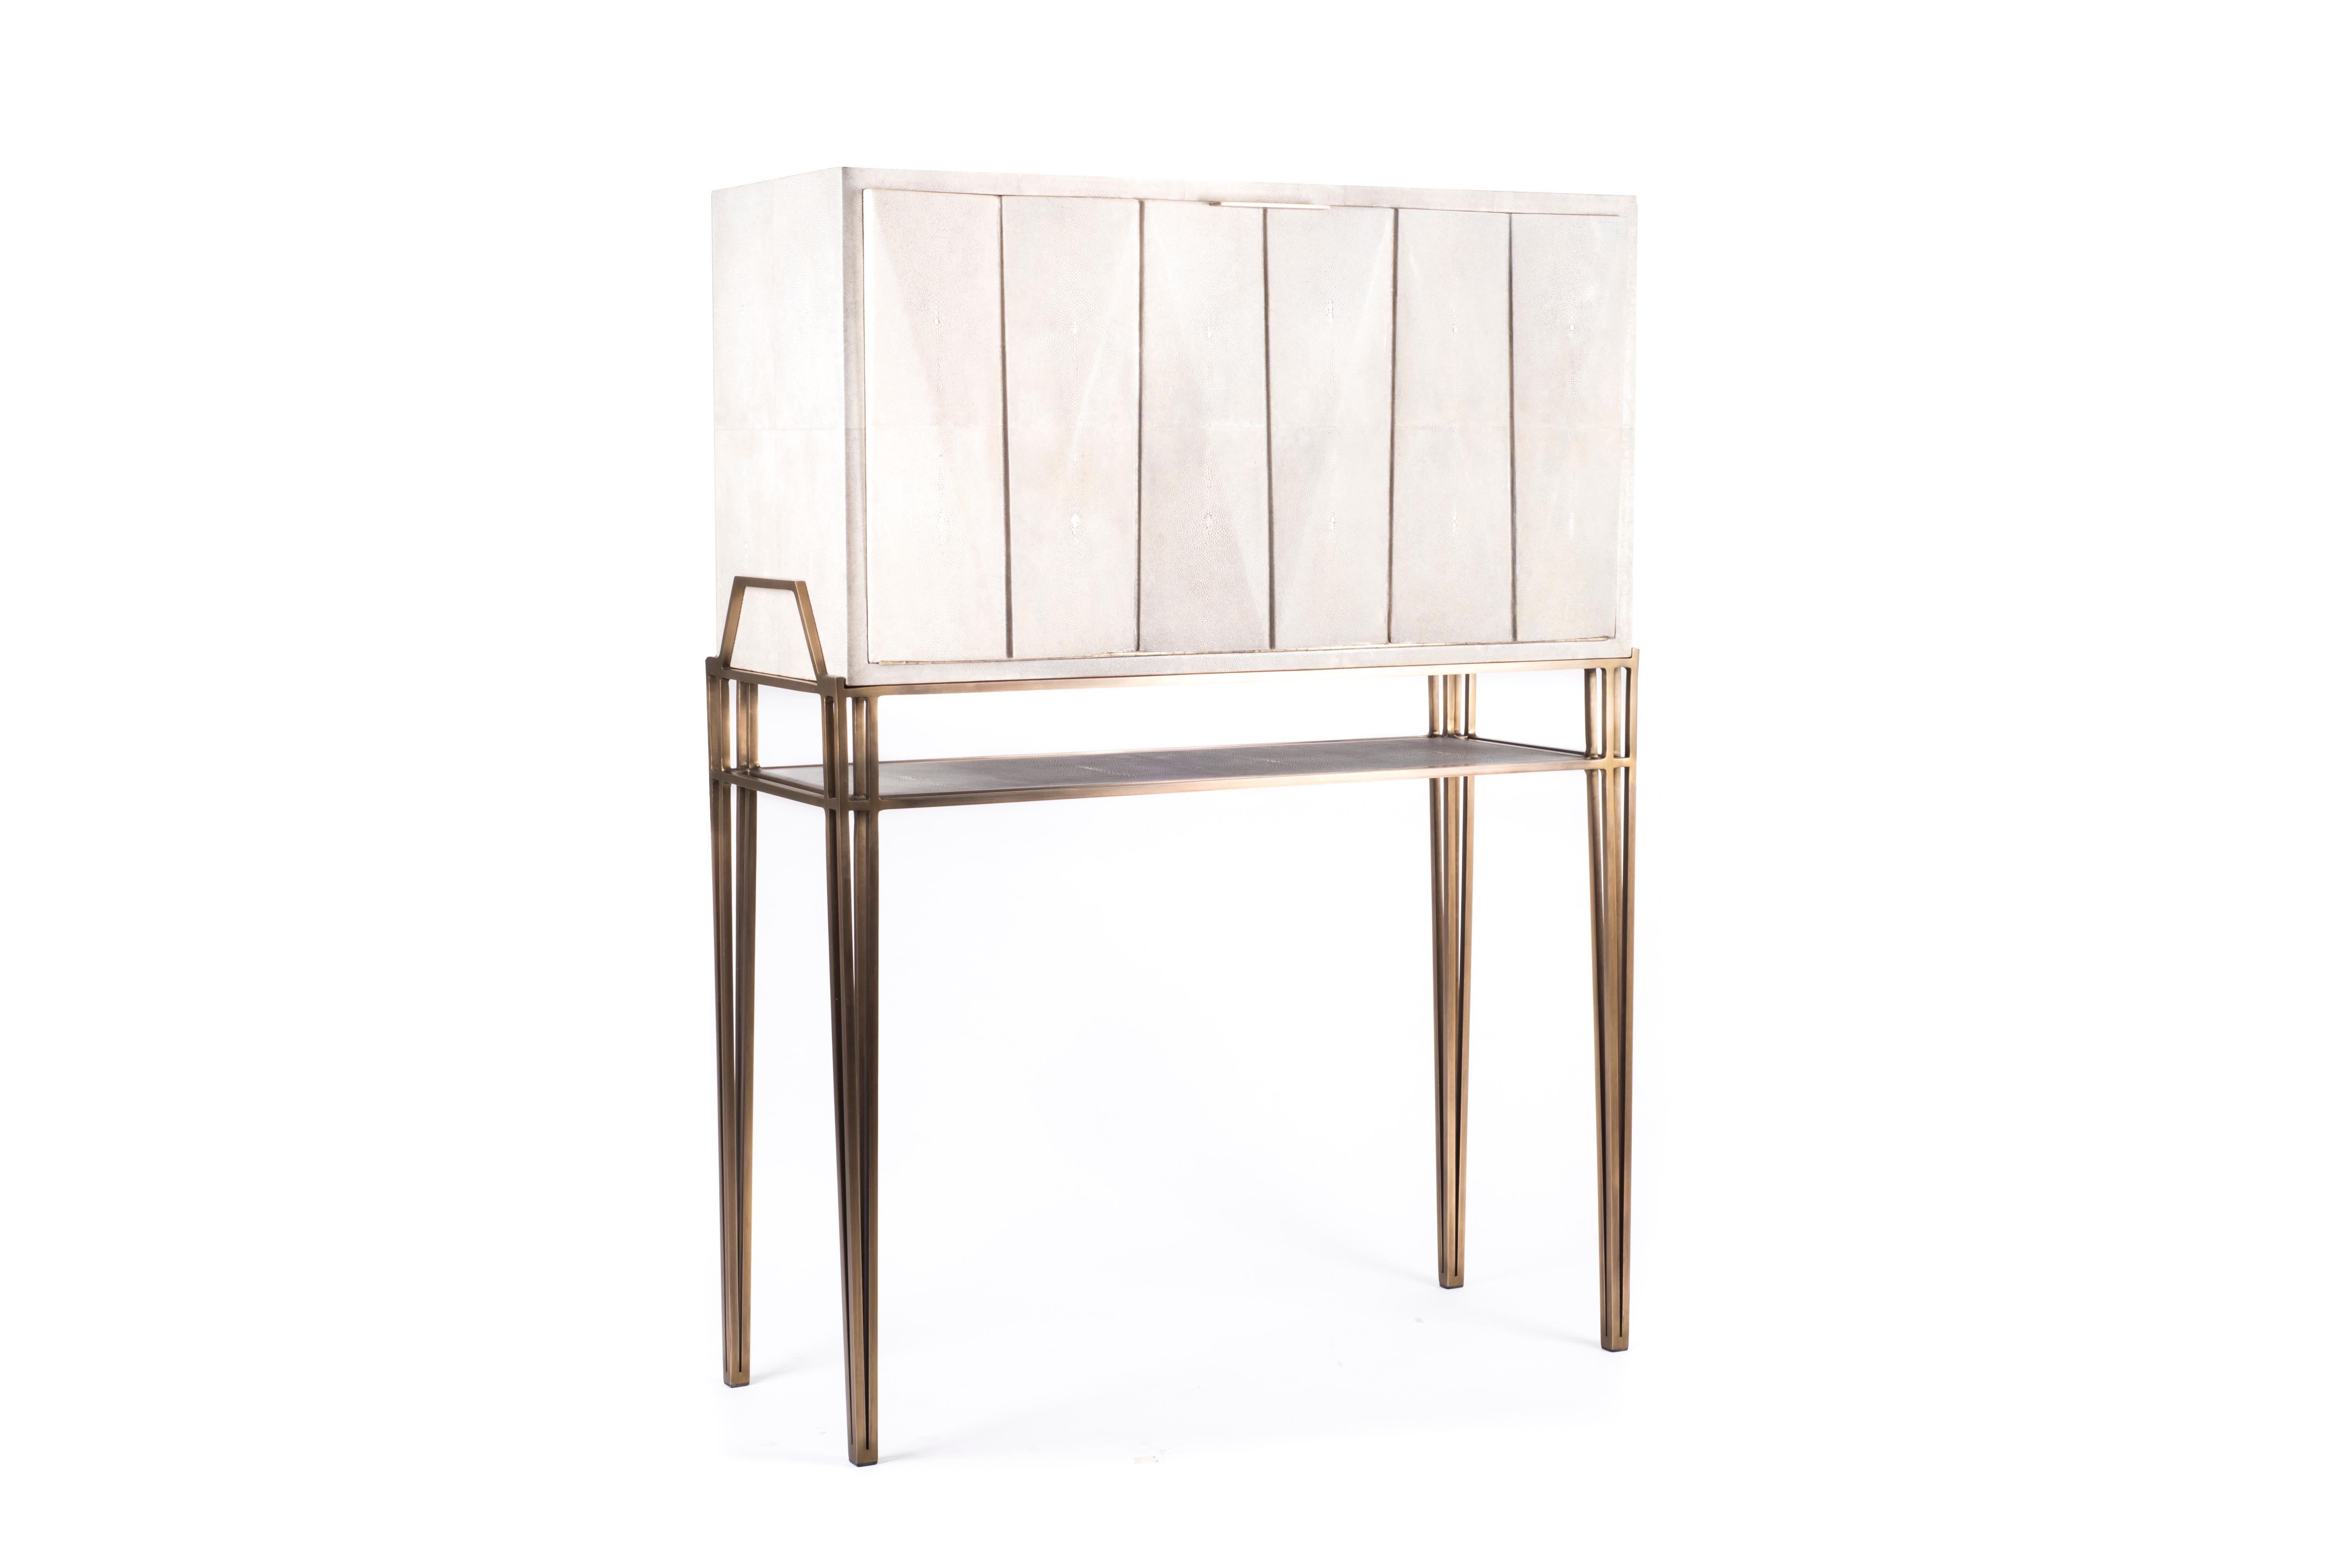 The secrétaire desk is the perfect functional working unit. The flap top opens up into a desk with several compartments, inlaid in shagreen and wood veneer, to store items and once closed offers a beautiful piece to look at. The top removable piece